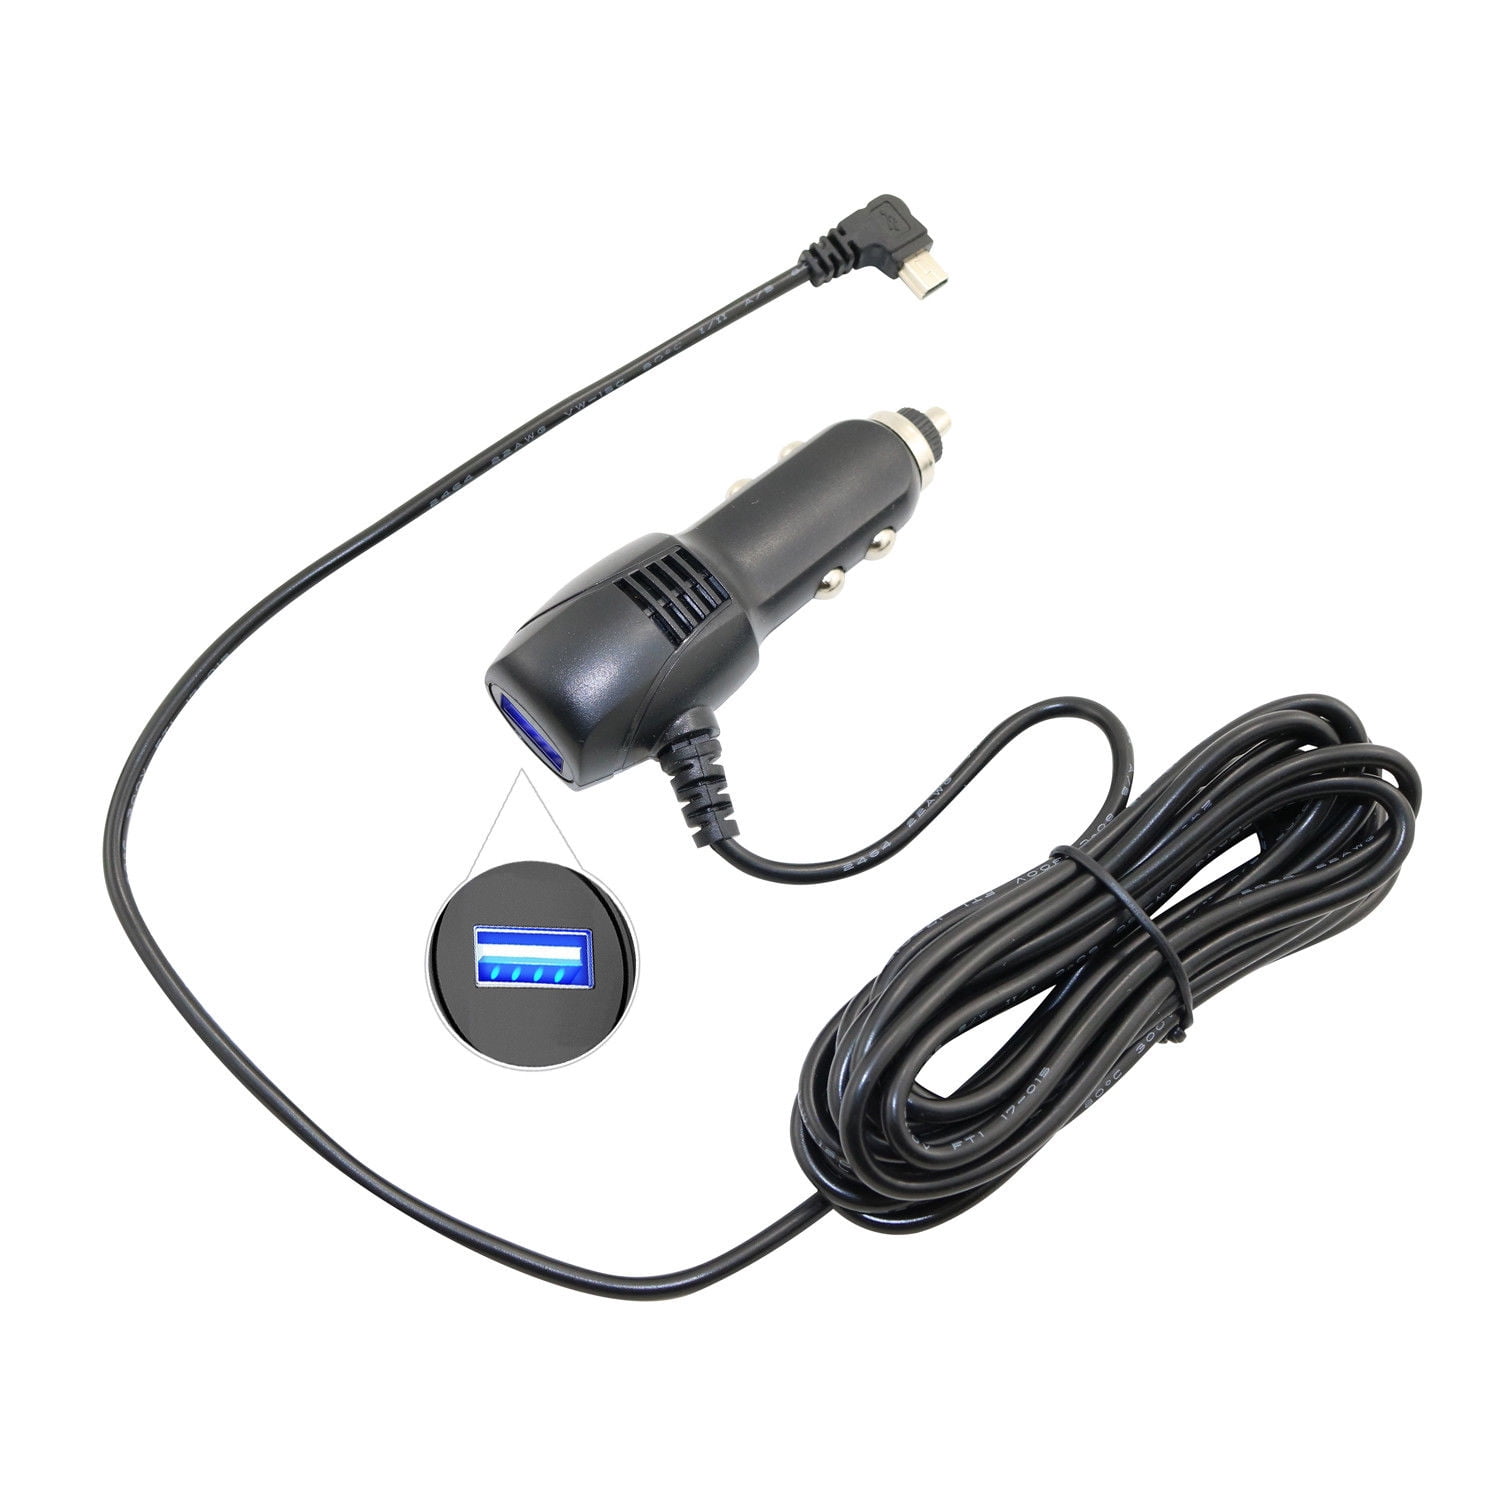 Car Charger Auto Power Supply Cord Lead For Garmin GPS Nuvi 270 l/t 270t/m 